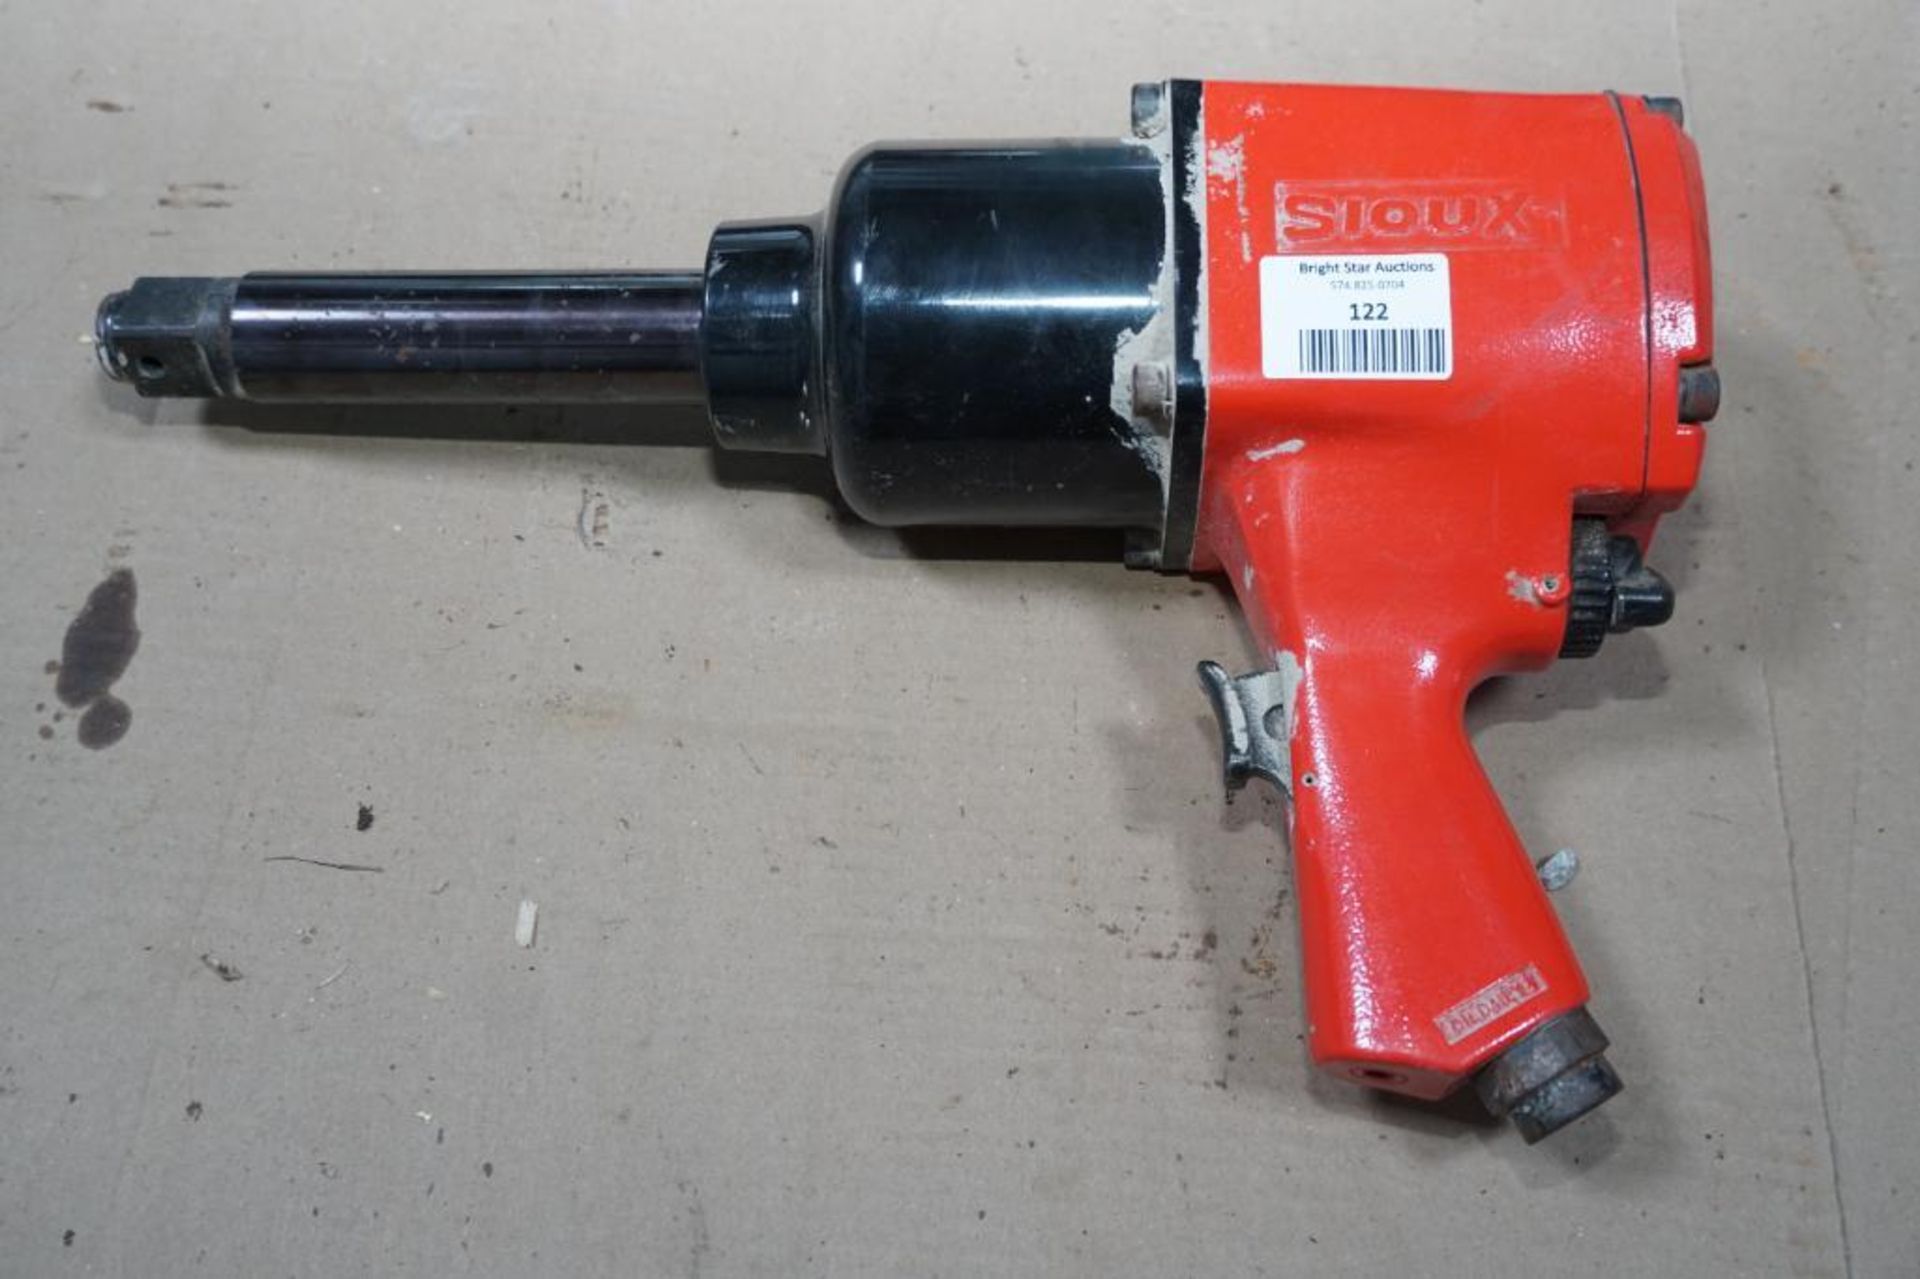 1" Sioux Impact Wrench